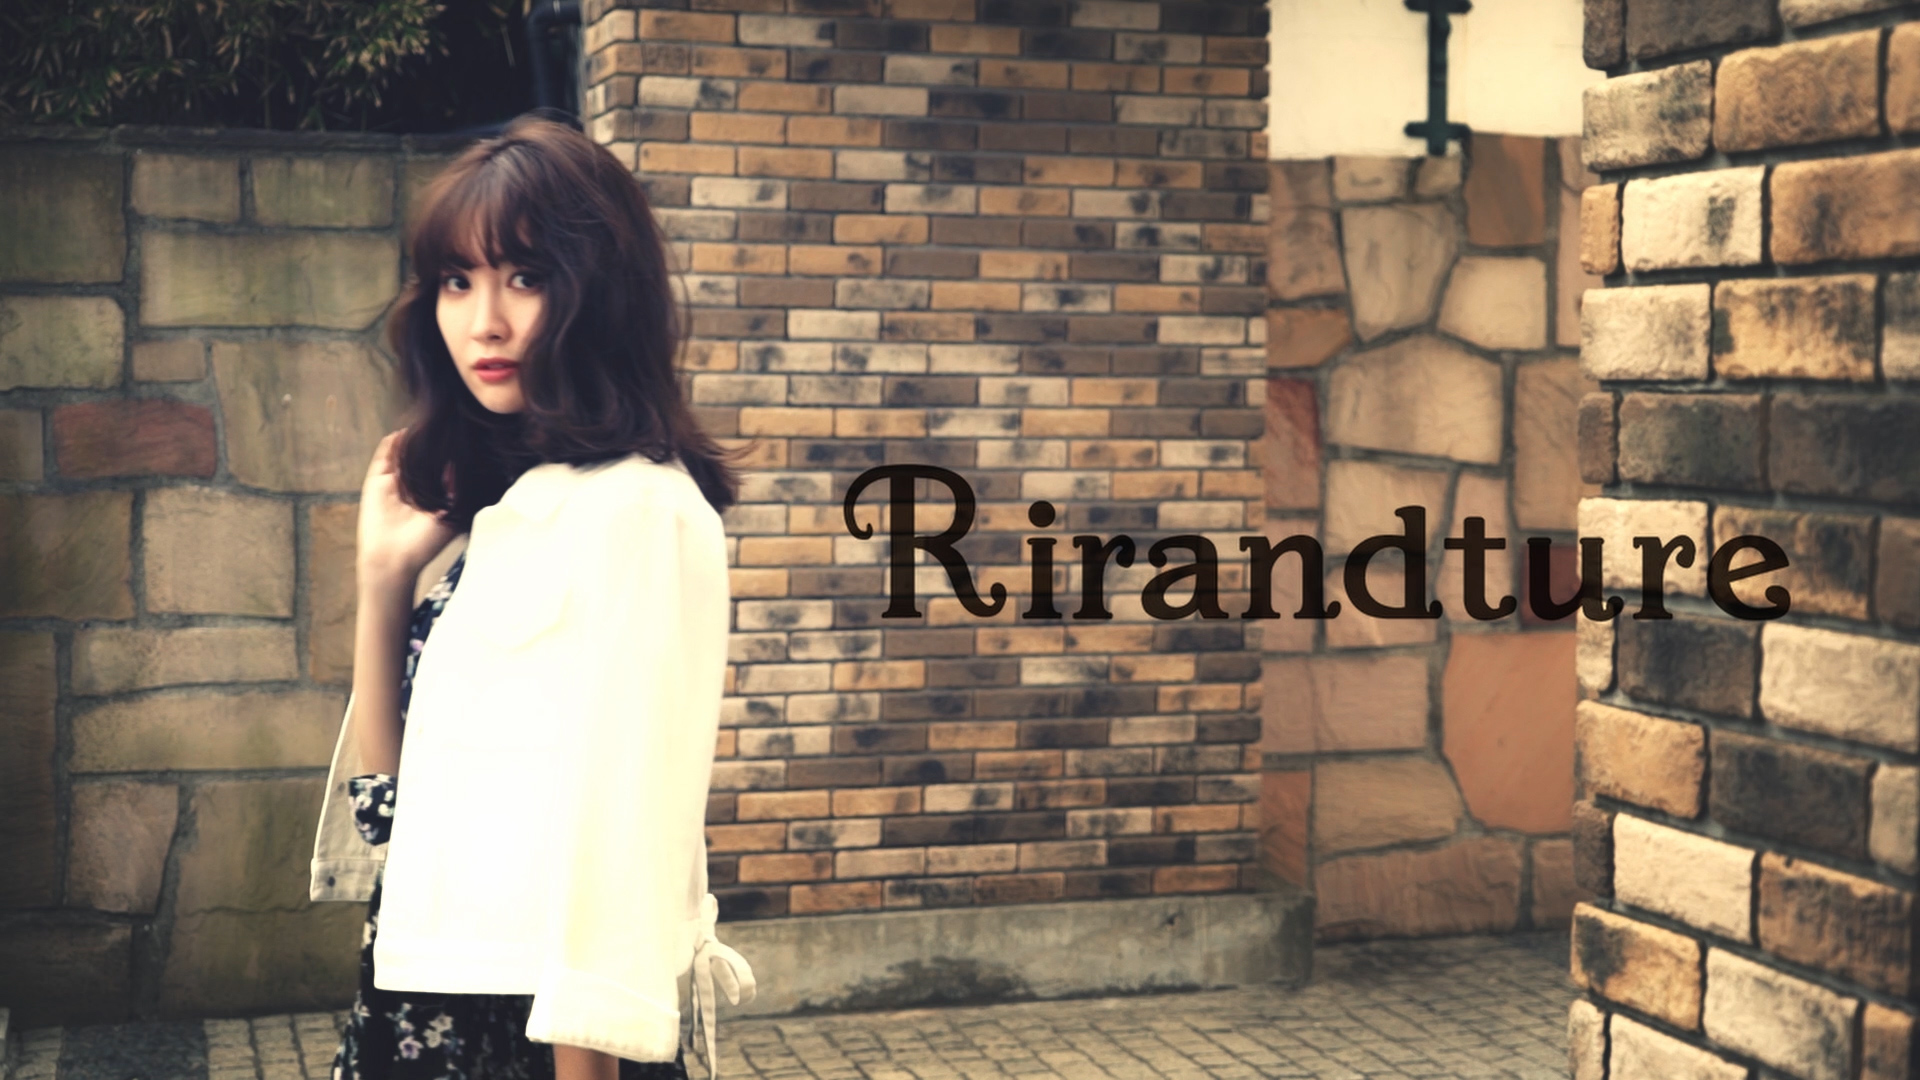 2019 Summer COLLECTION - Rirandture │【公式通販】Arpege story 